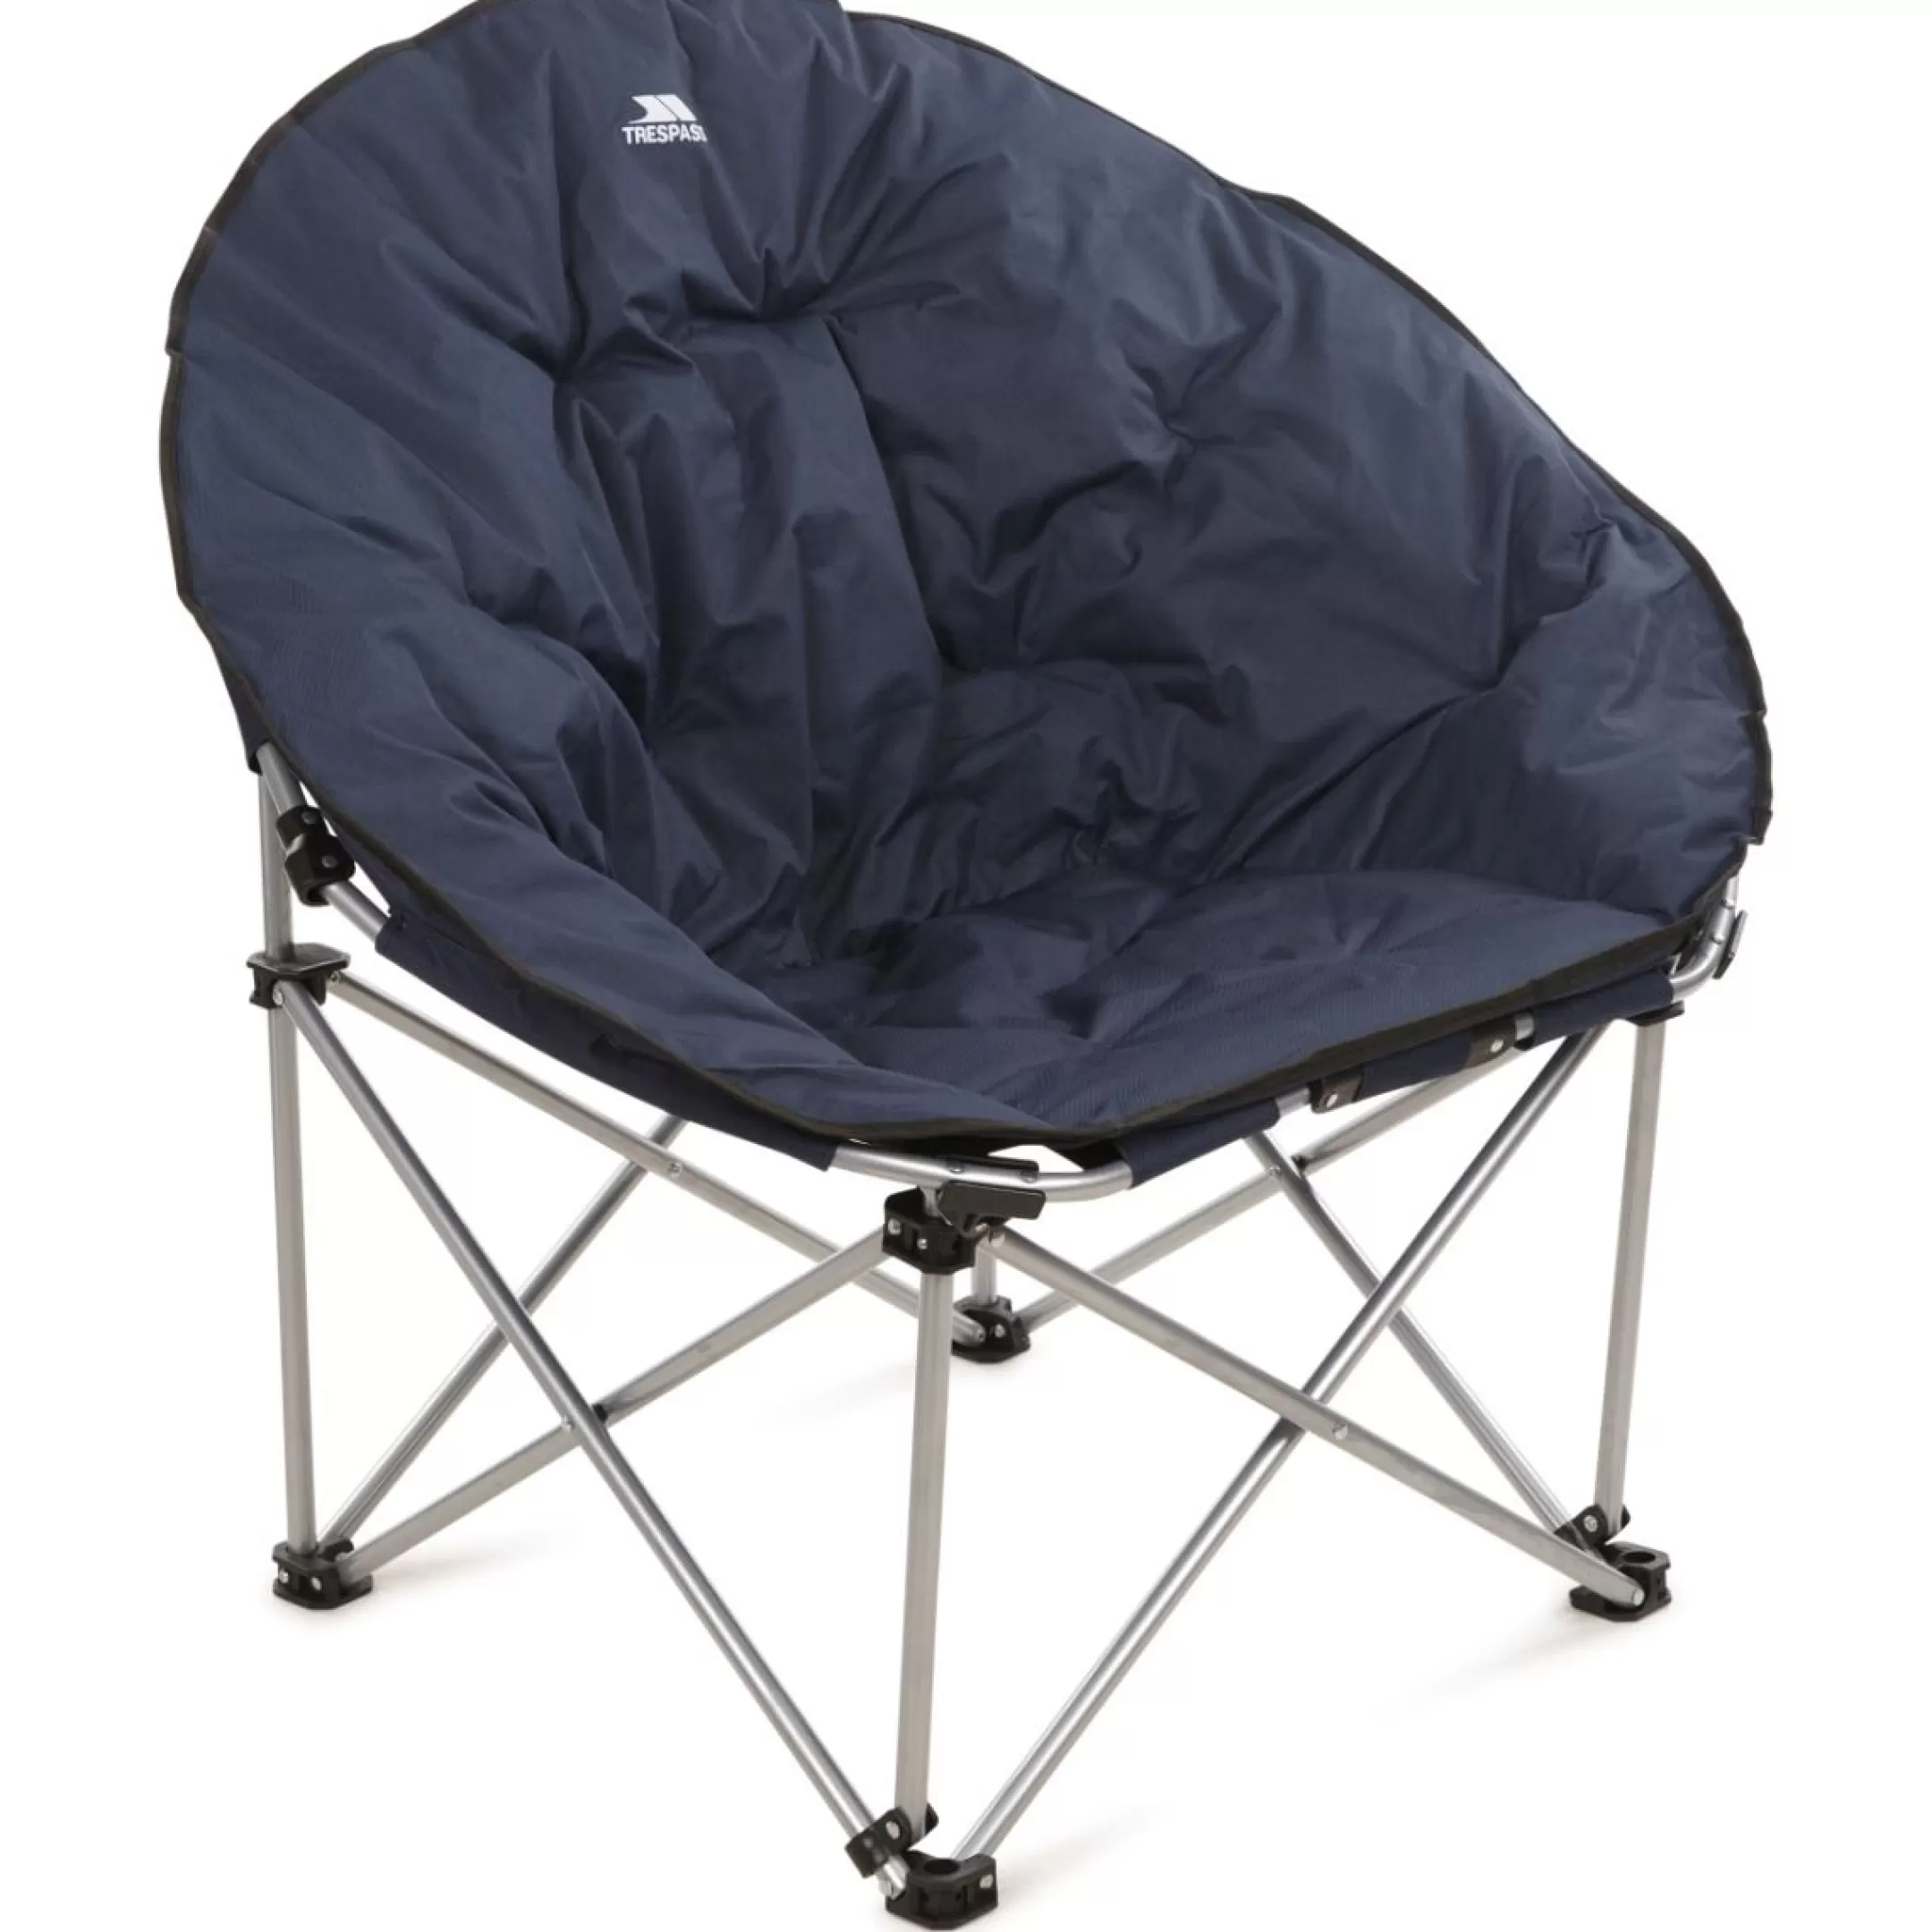 Oversized Moon Chair Camping Folding Padded Tycho | Trespass Flash Sale